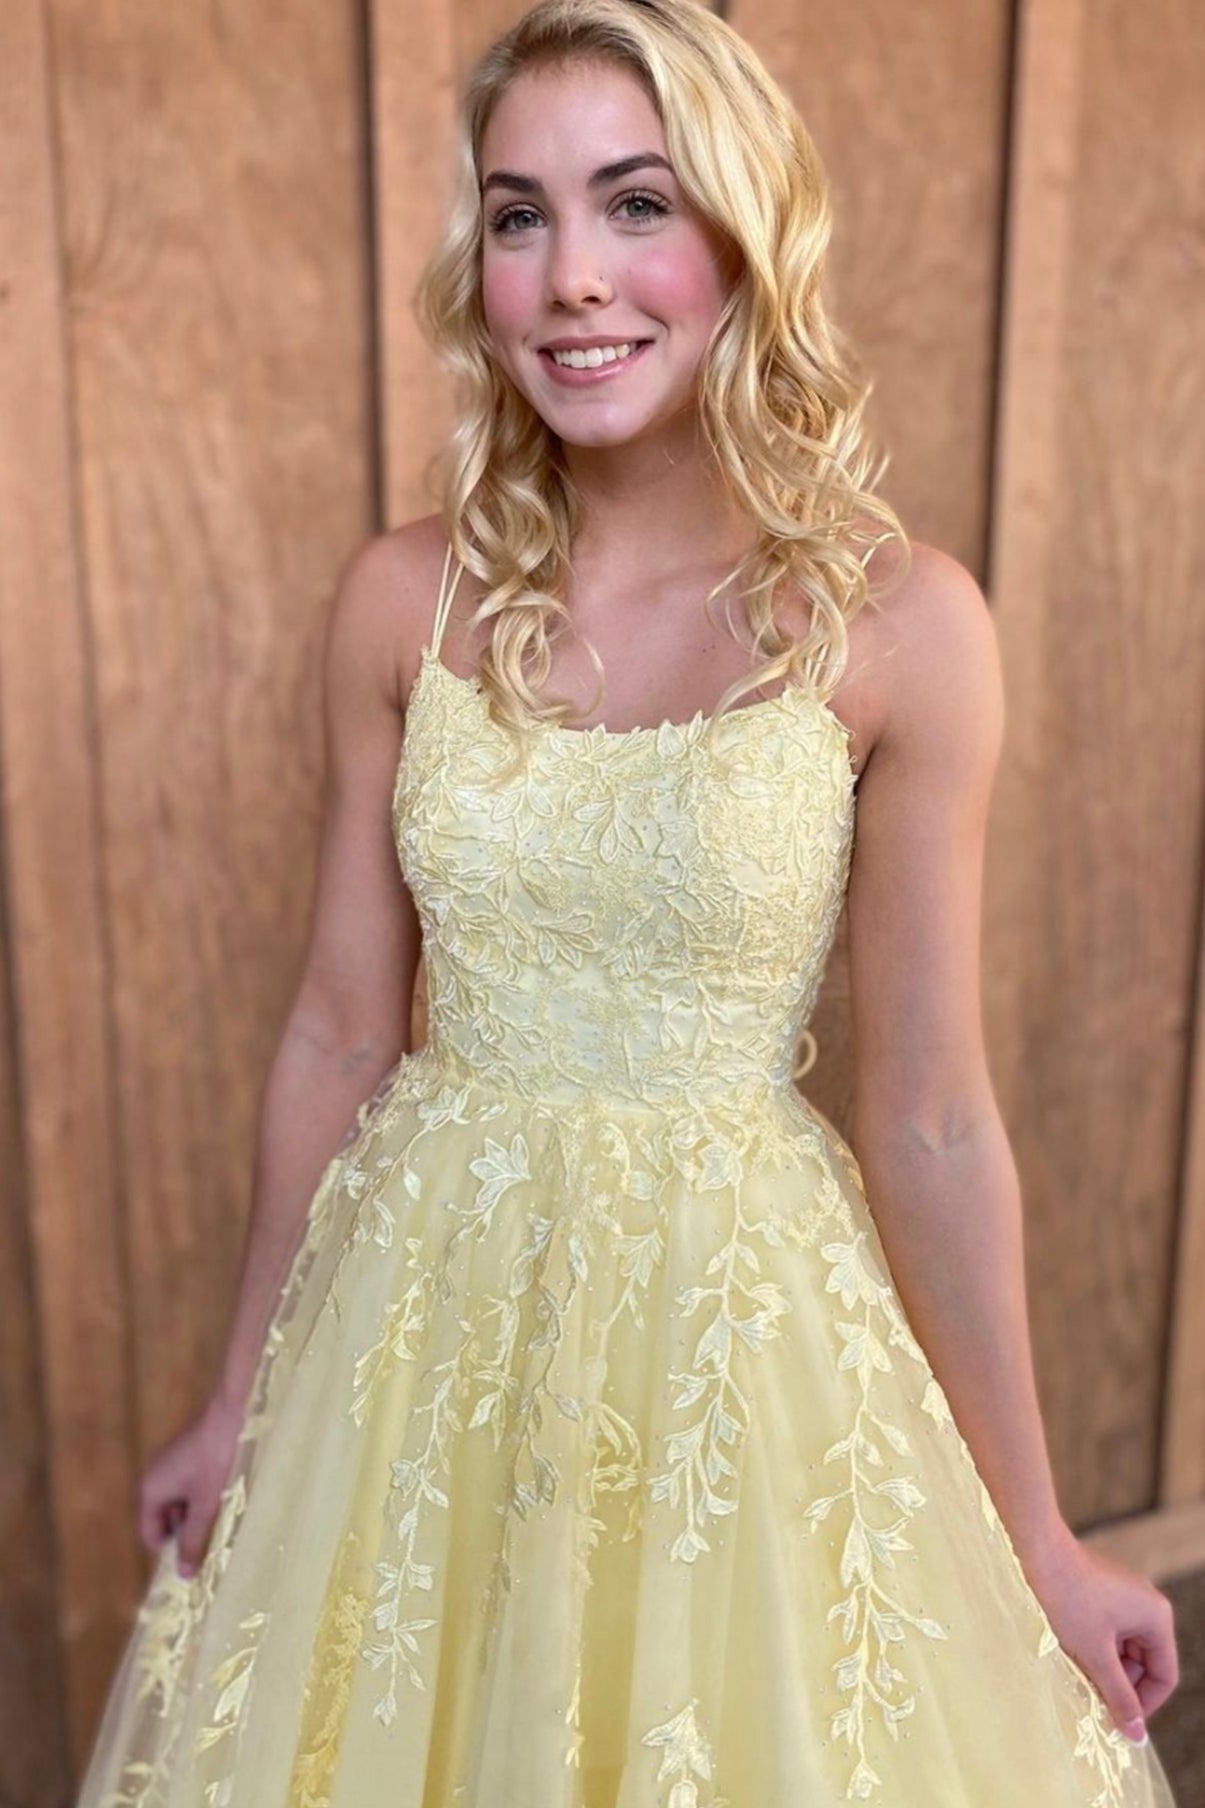 Yellow Spaghetti Strap Tulle Lace Long Prom Dress, A-Line Backless Evening Dress